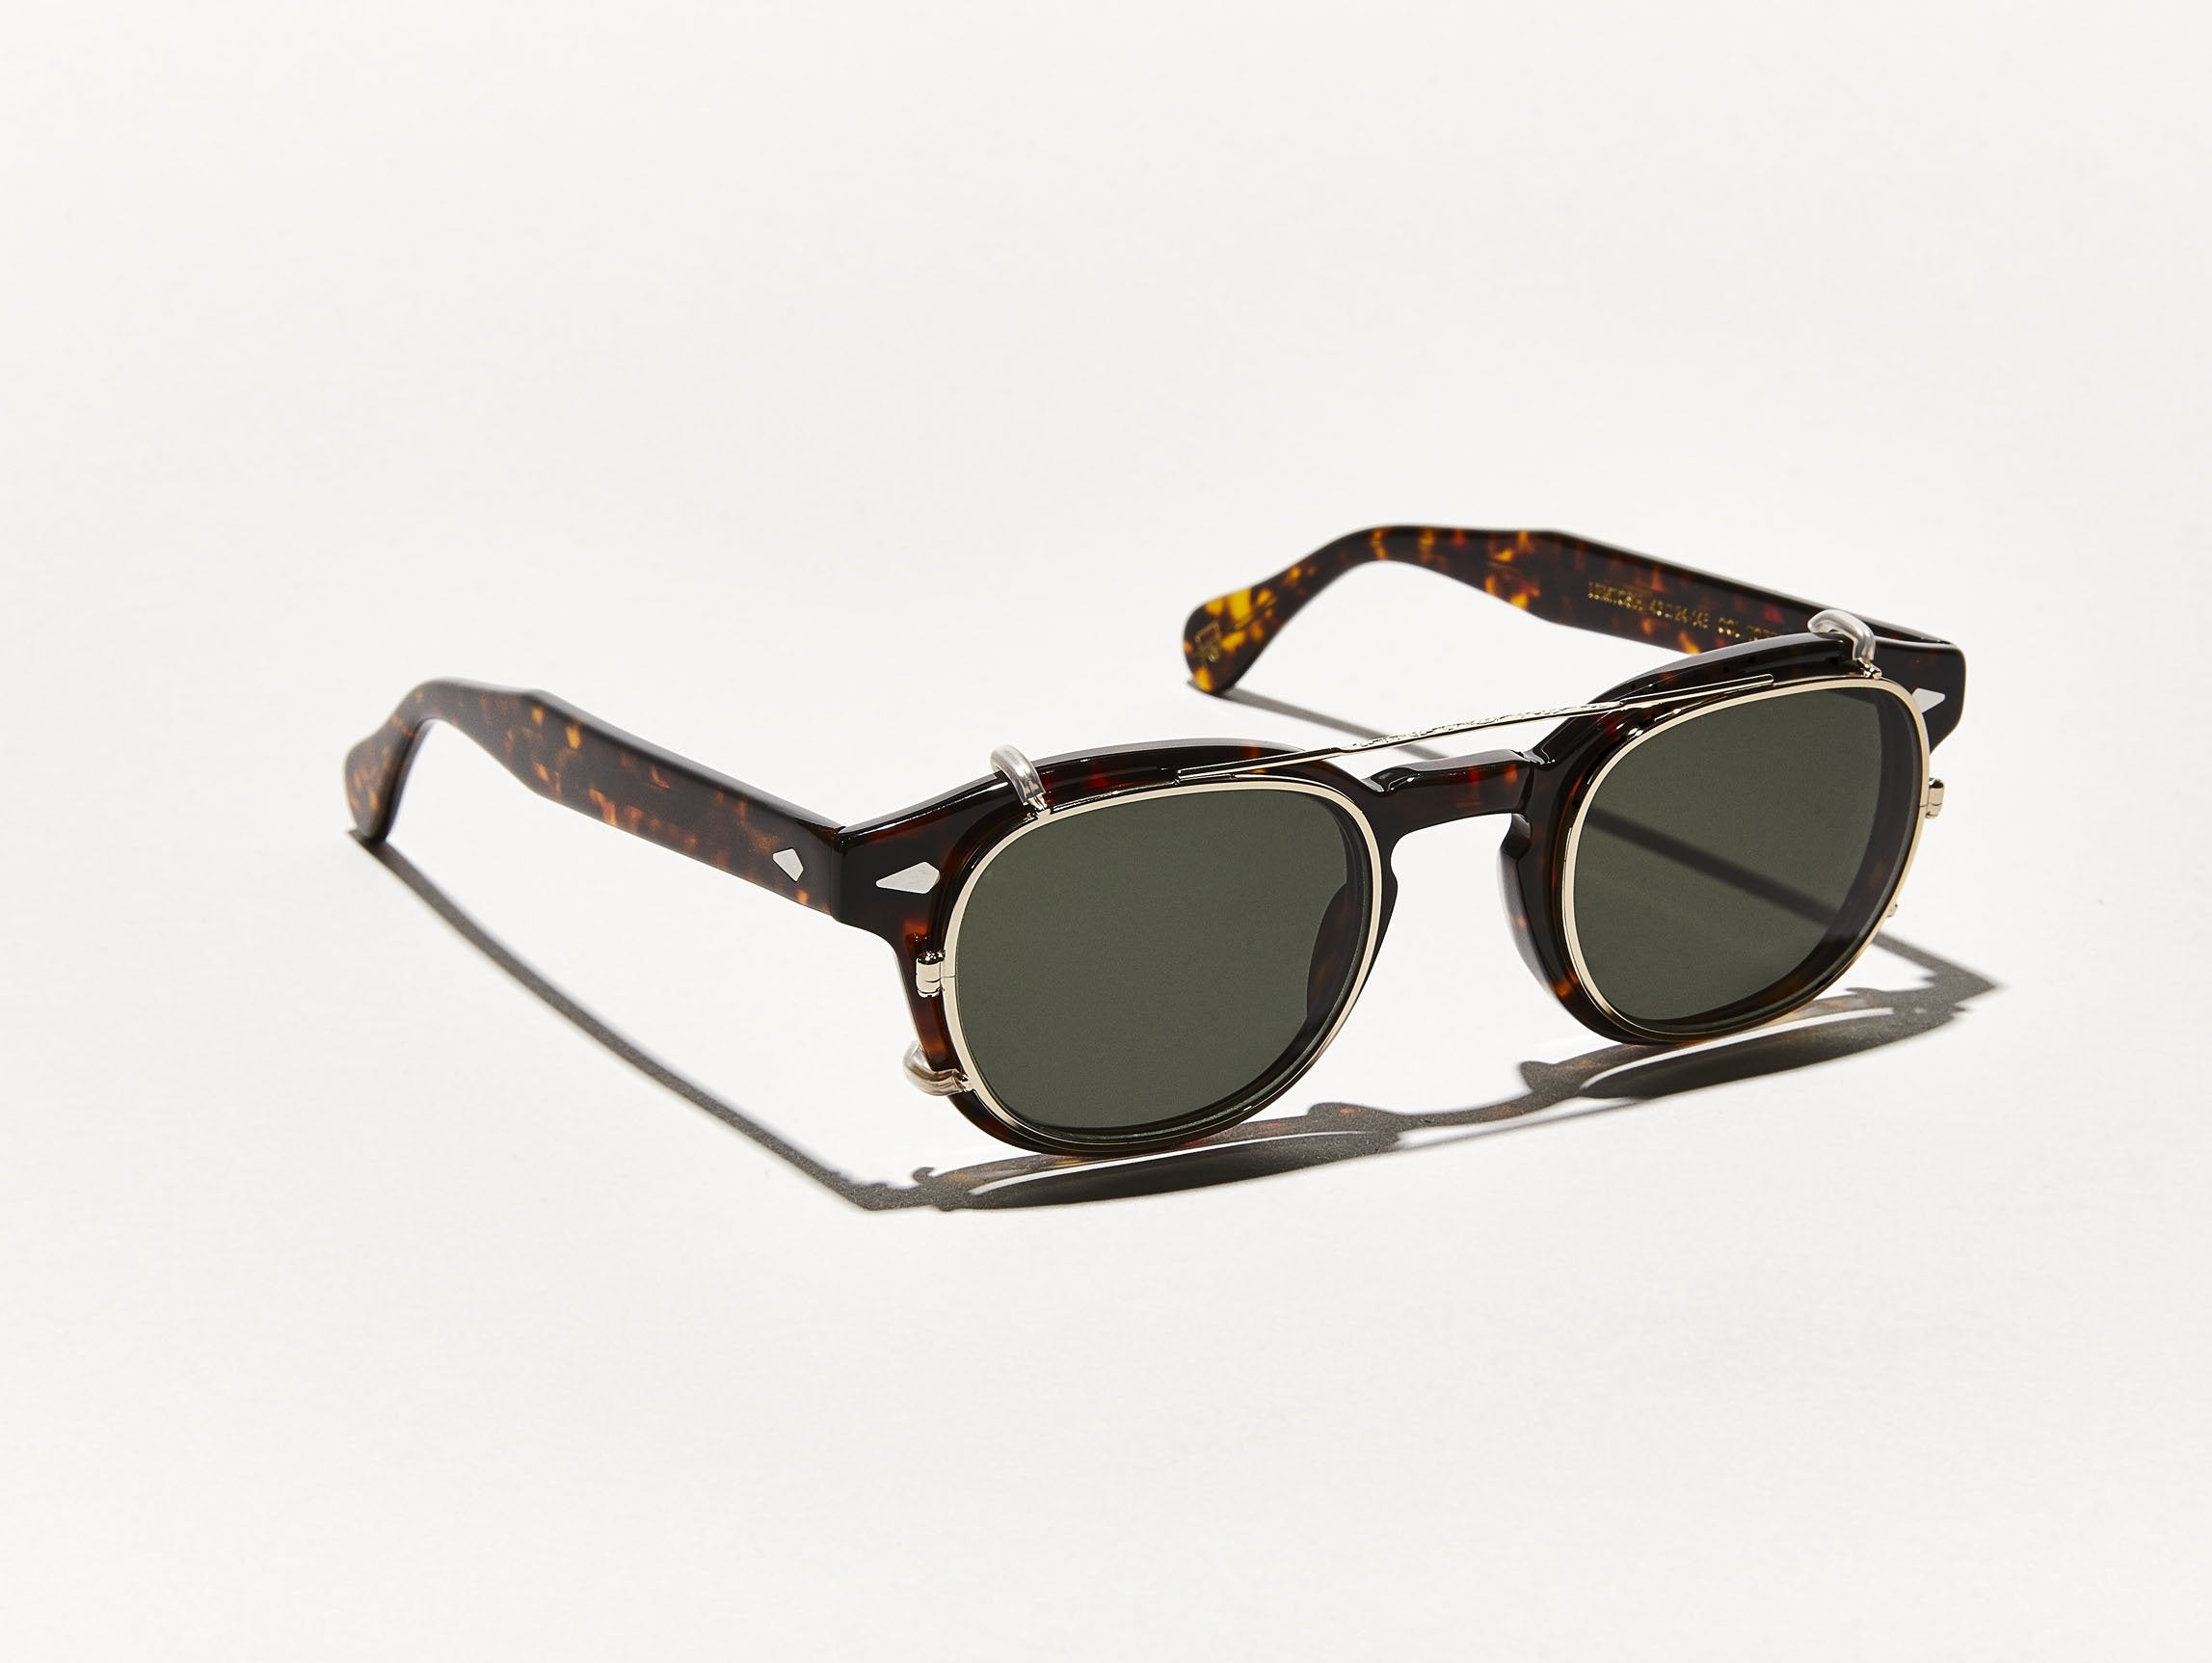 The CLIPTOSH POLARIZED in Gold with G-15 Lenses